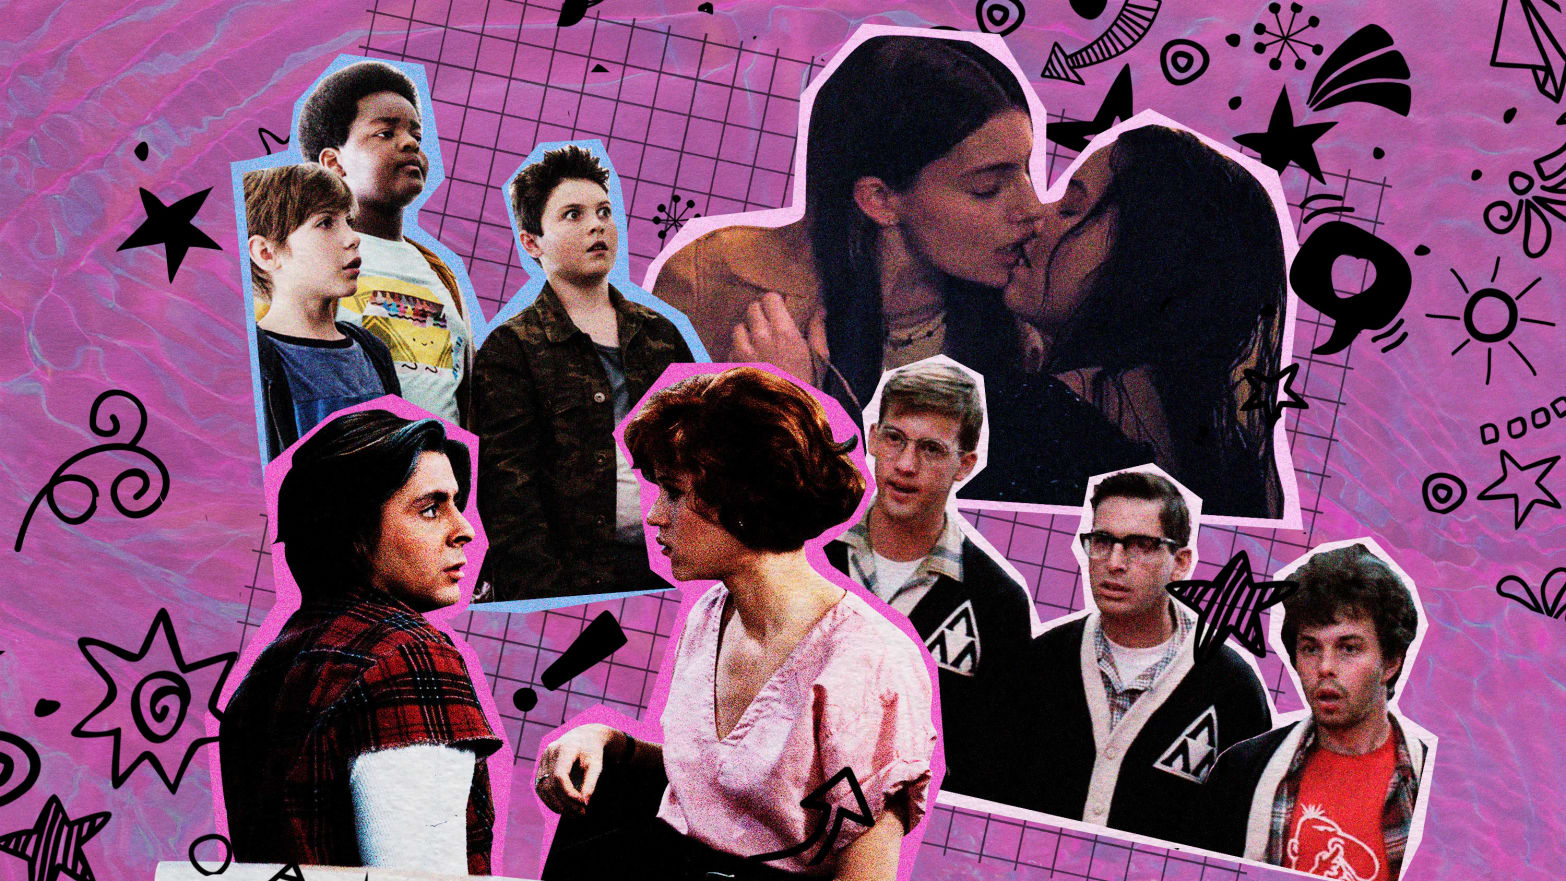 Teen Movies Still Arent Getting Sex and Consent Right, Says Michelle Meek